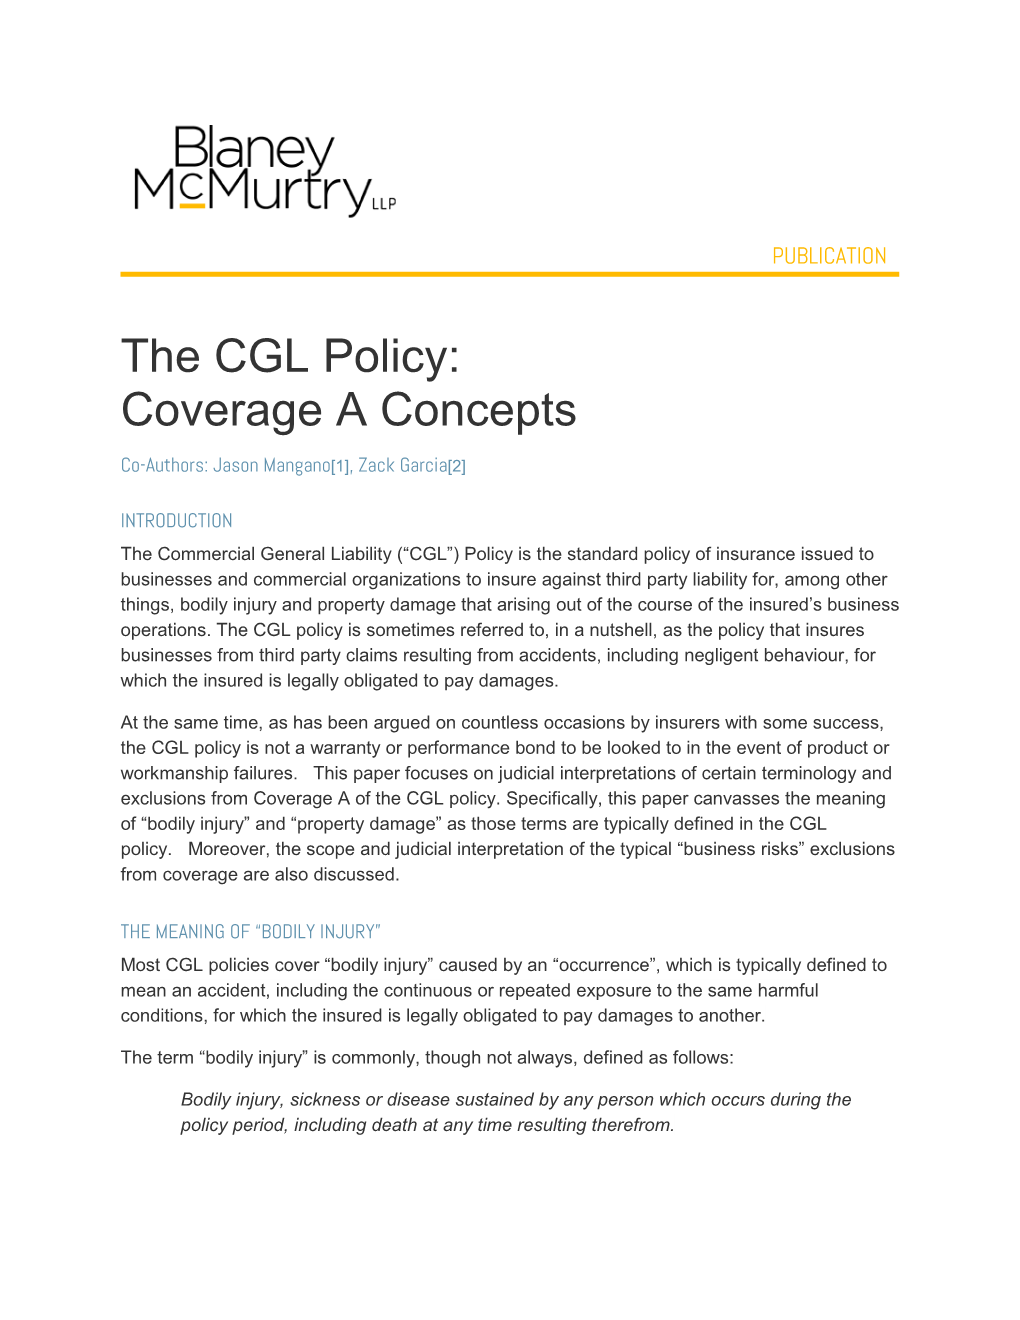 The CGL Policy: Coverage a Concepts